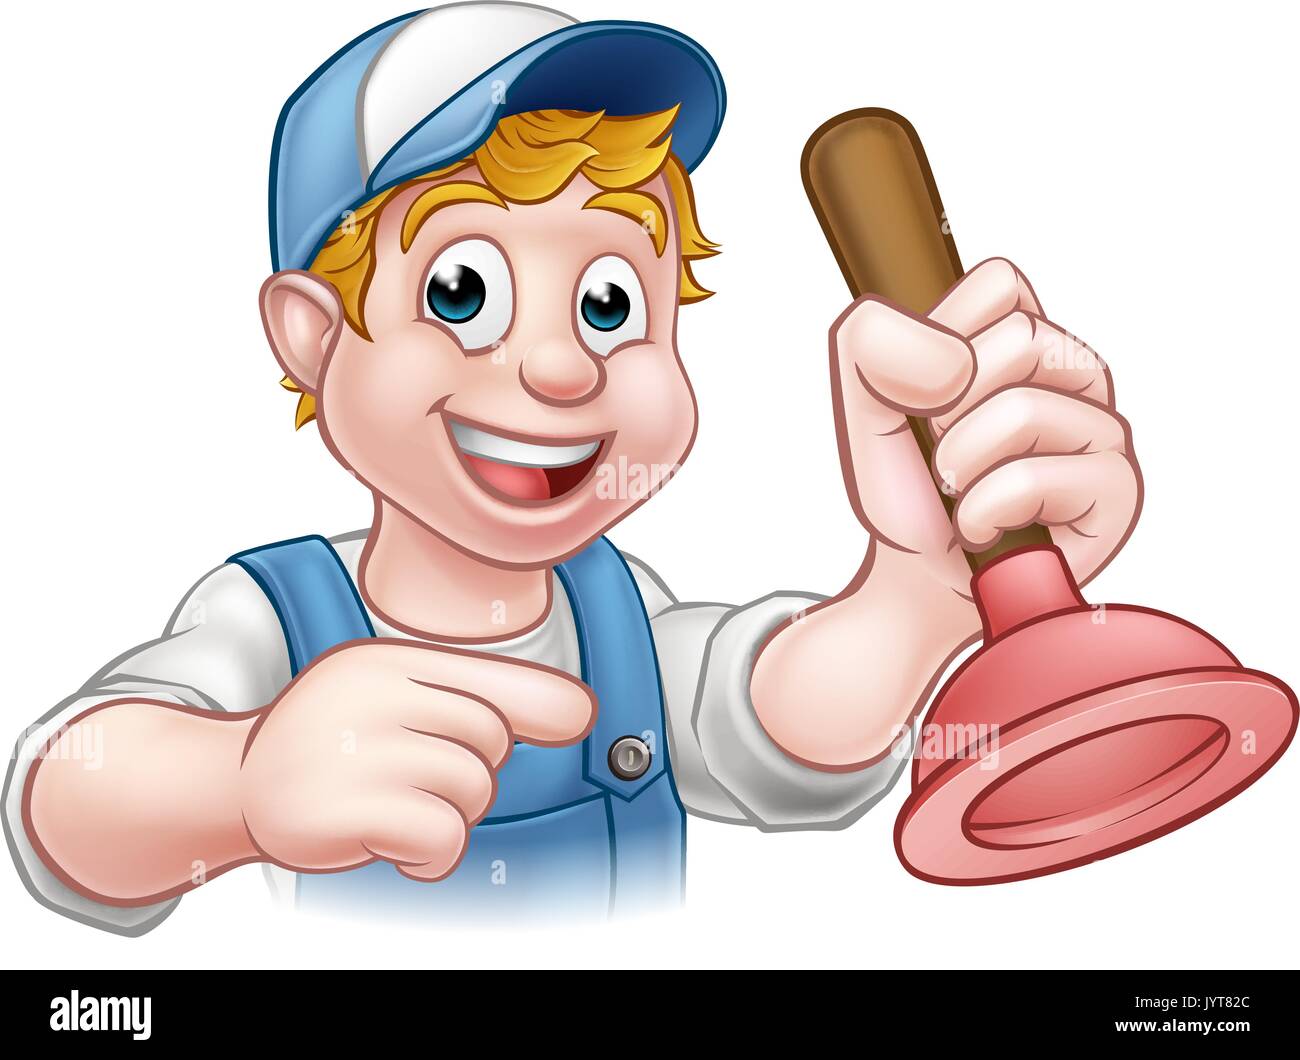 Handyman Plumber With Plunger Cartoon Character Stock Vector